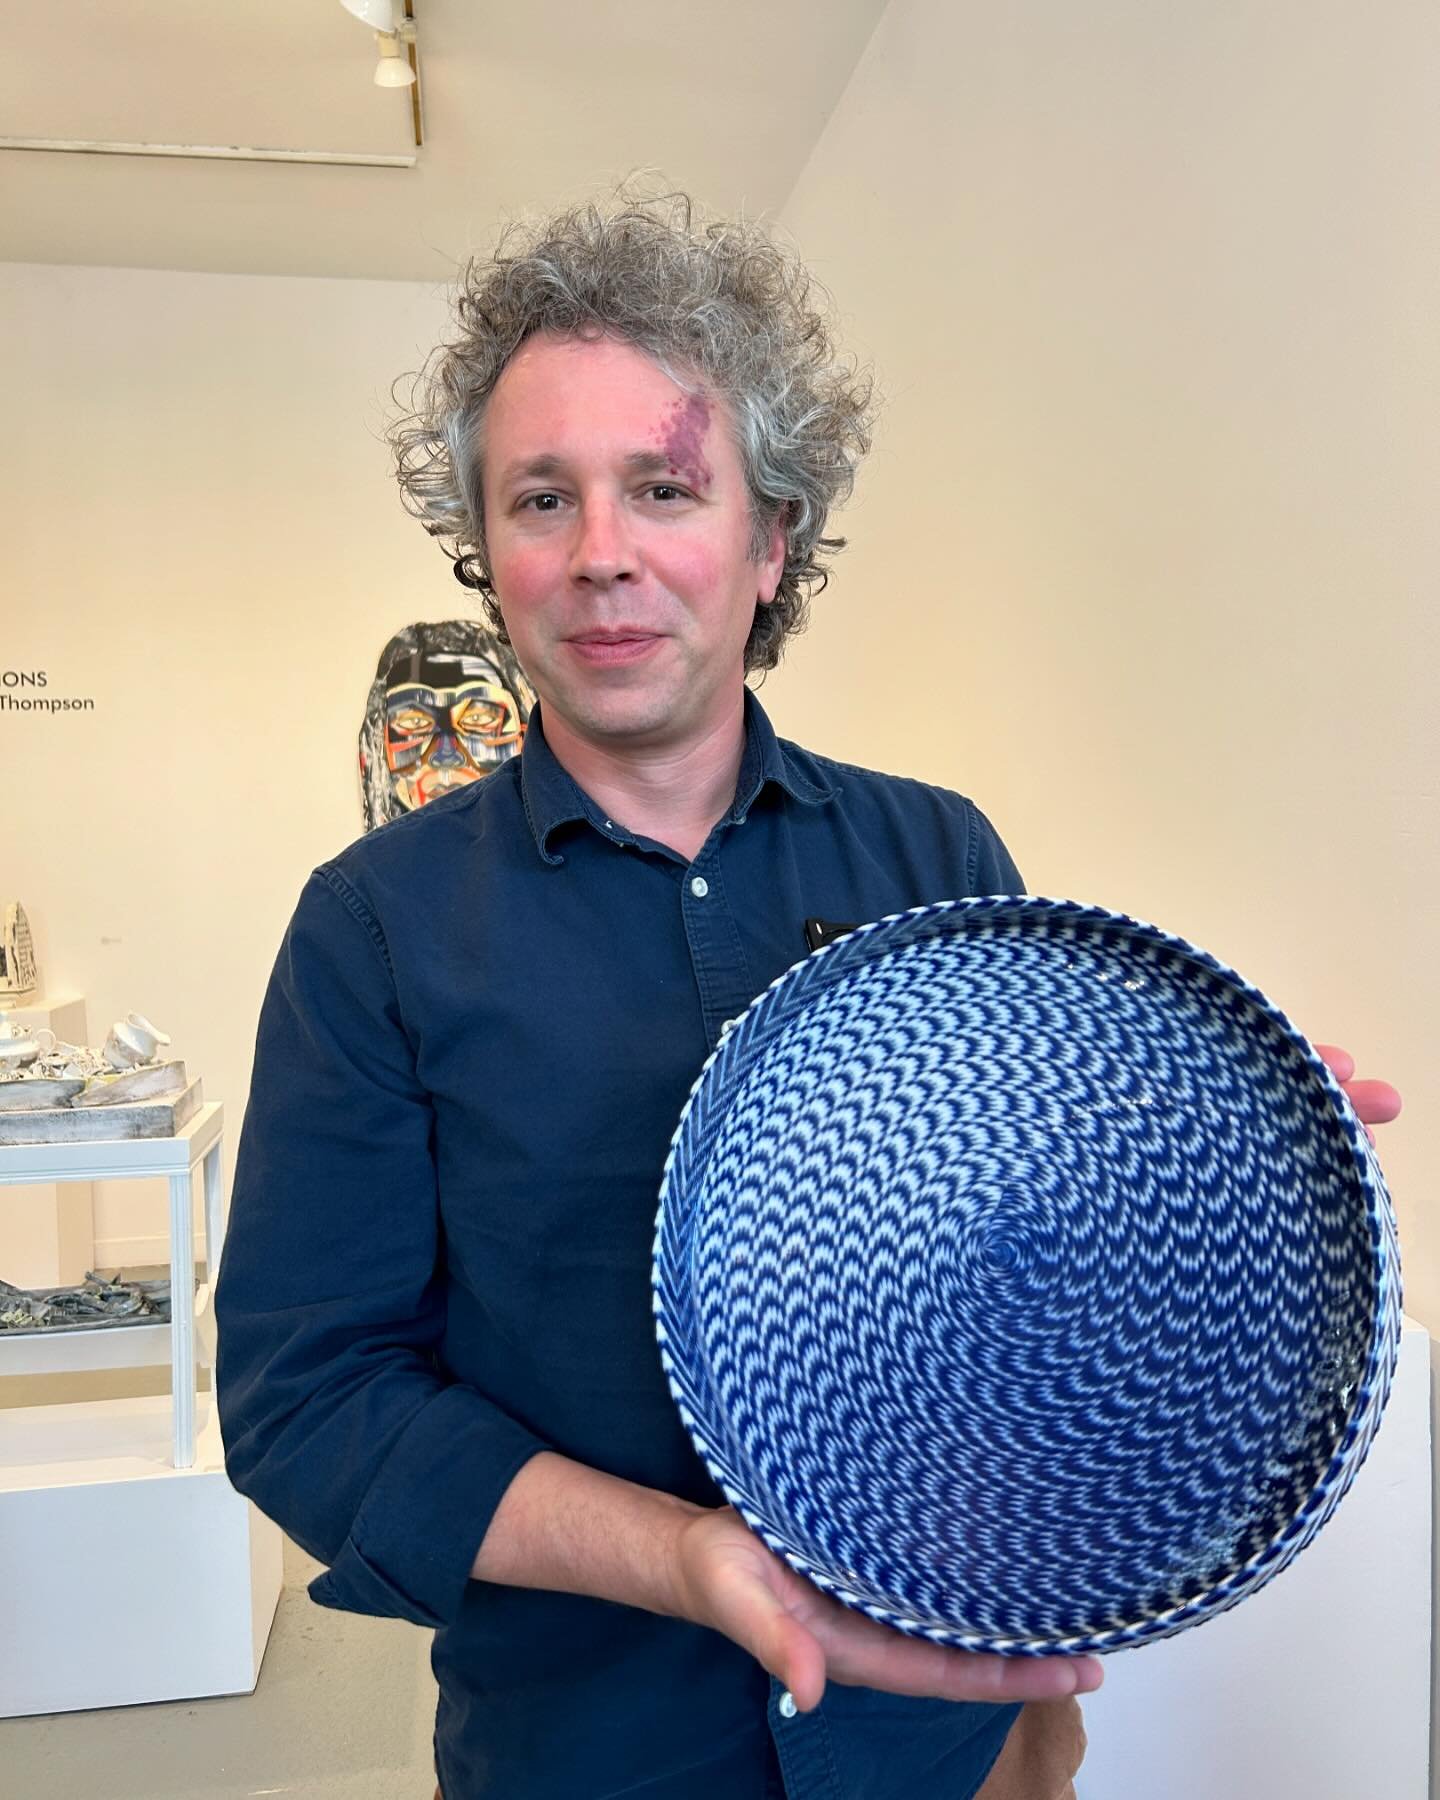 Clay Art Center Shop is excited to announce new work from artist Keith Simpson. Keith&rsquo;s innovative work combines the traditional clay medium with 3D printing technology. His vibrant 3D-printed porcelain utilitarian work &ldquo;investigates trad